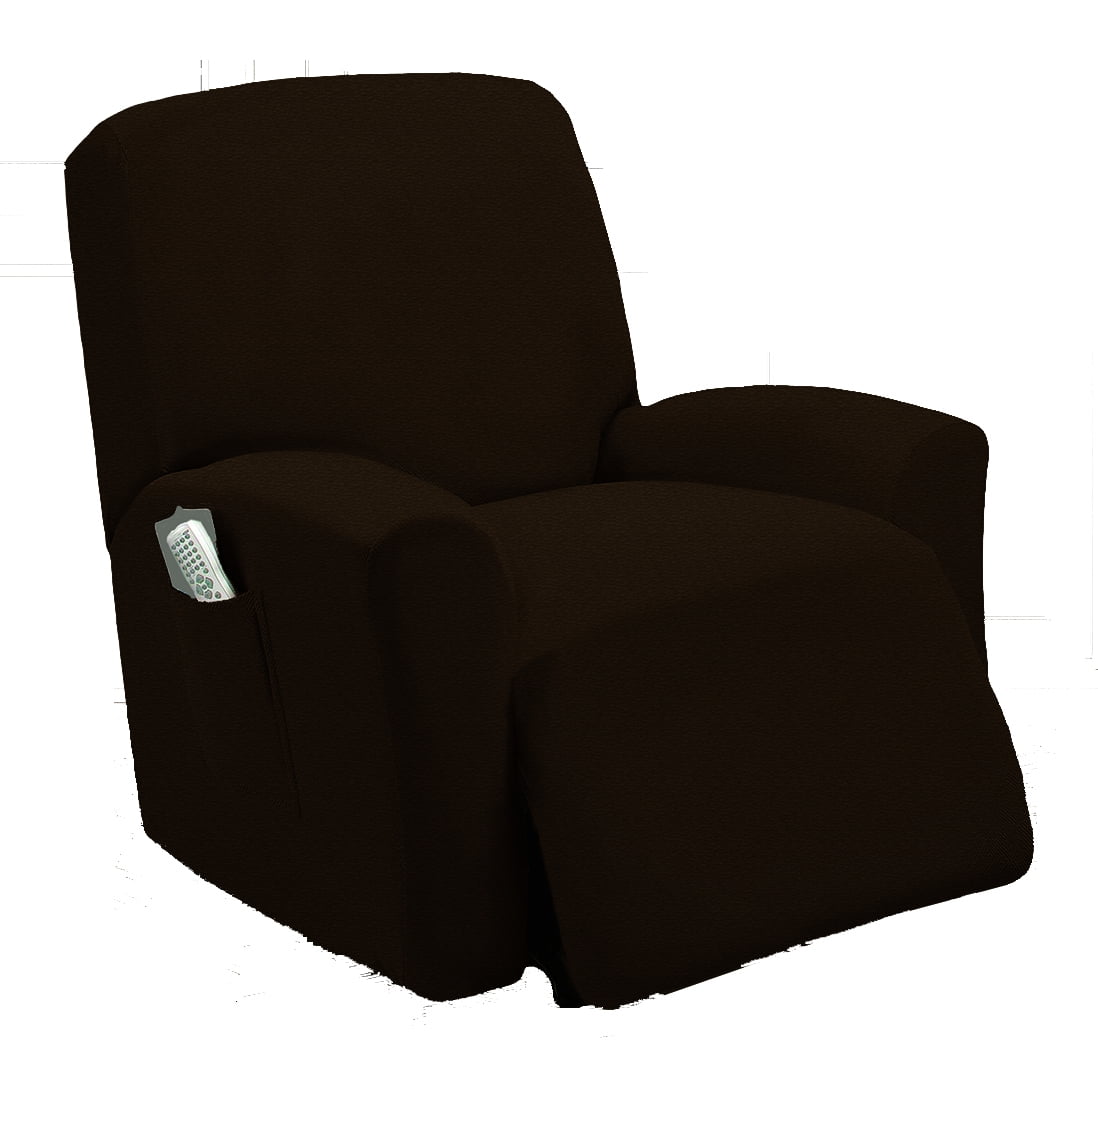 Black Pique Stretch Form Fit Furniture Chair Recliner Lazy Boy Cover Slipcover 